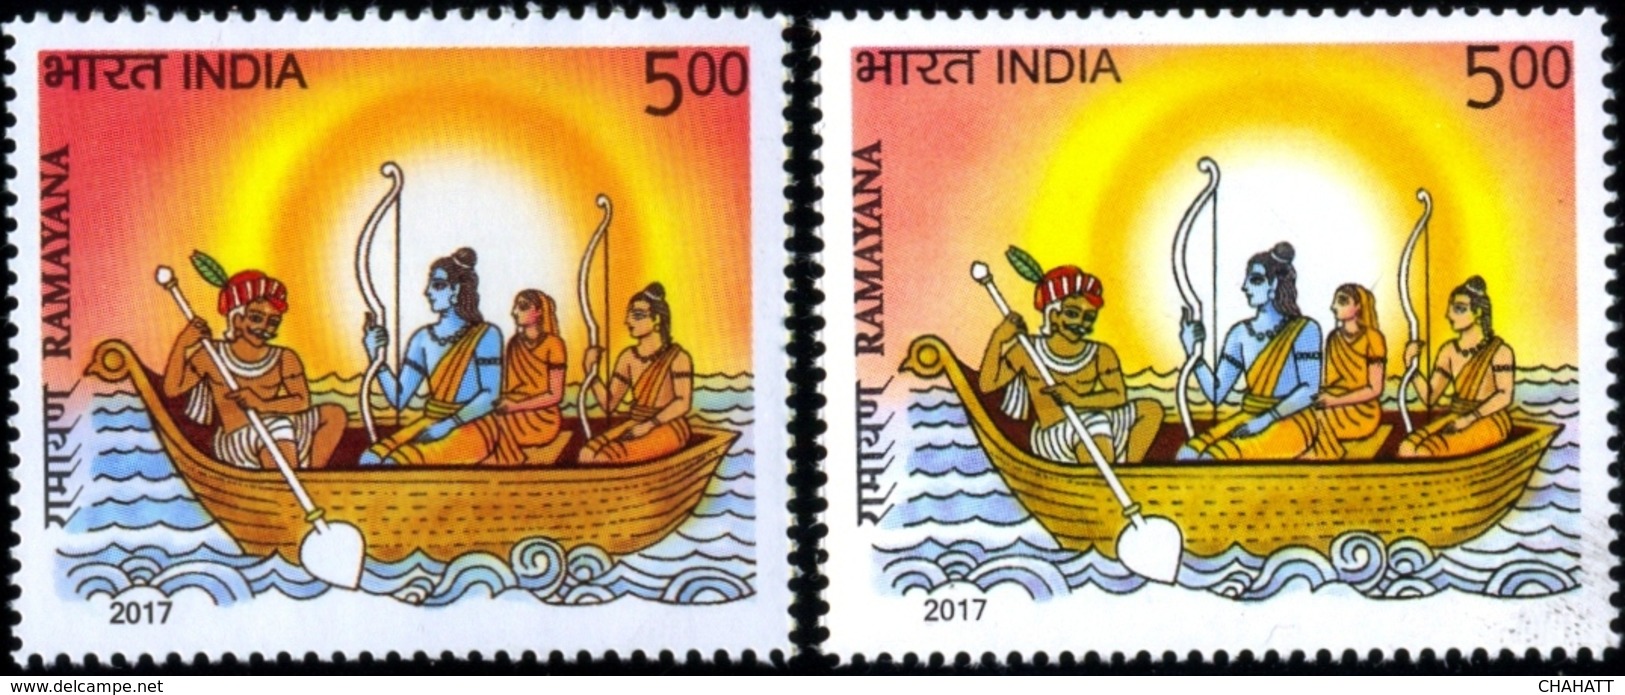 RELIGIONS-HINDUISM- EPIC RAMAYAN-ERROR-COLOR VARIETIES-LORD RAMA WITH KEVAT IN A BOAT -2017-SCARCE-MNH-H-805 - Hinduism